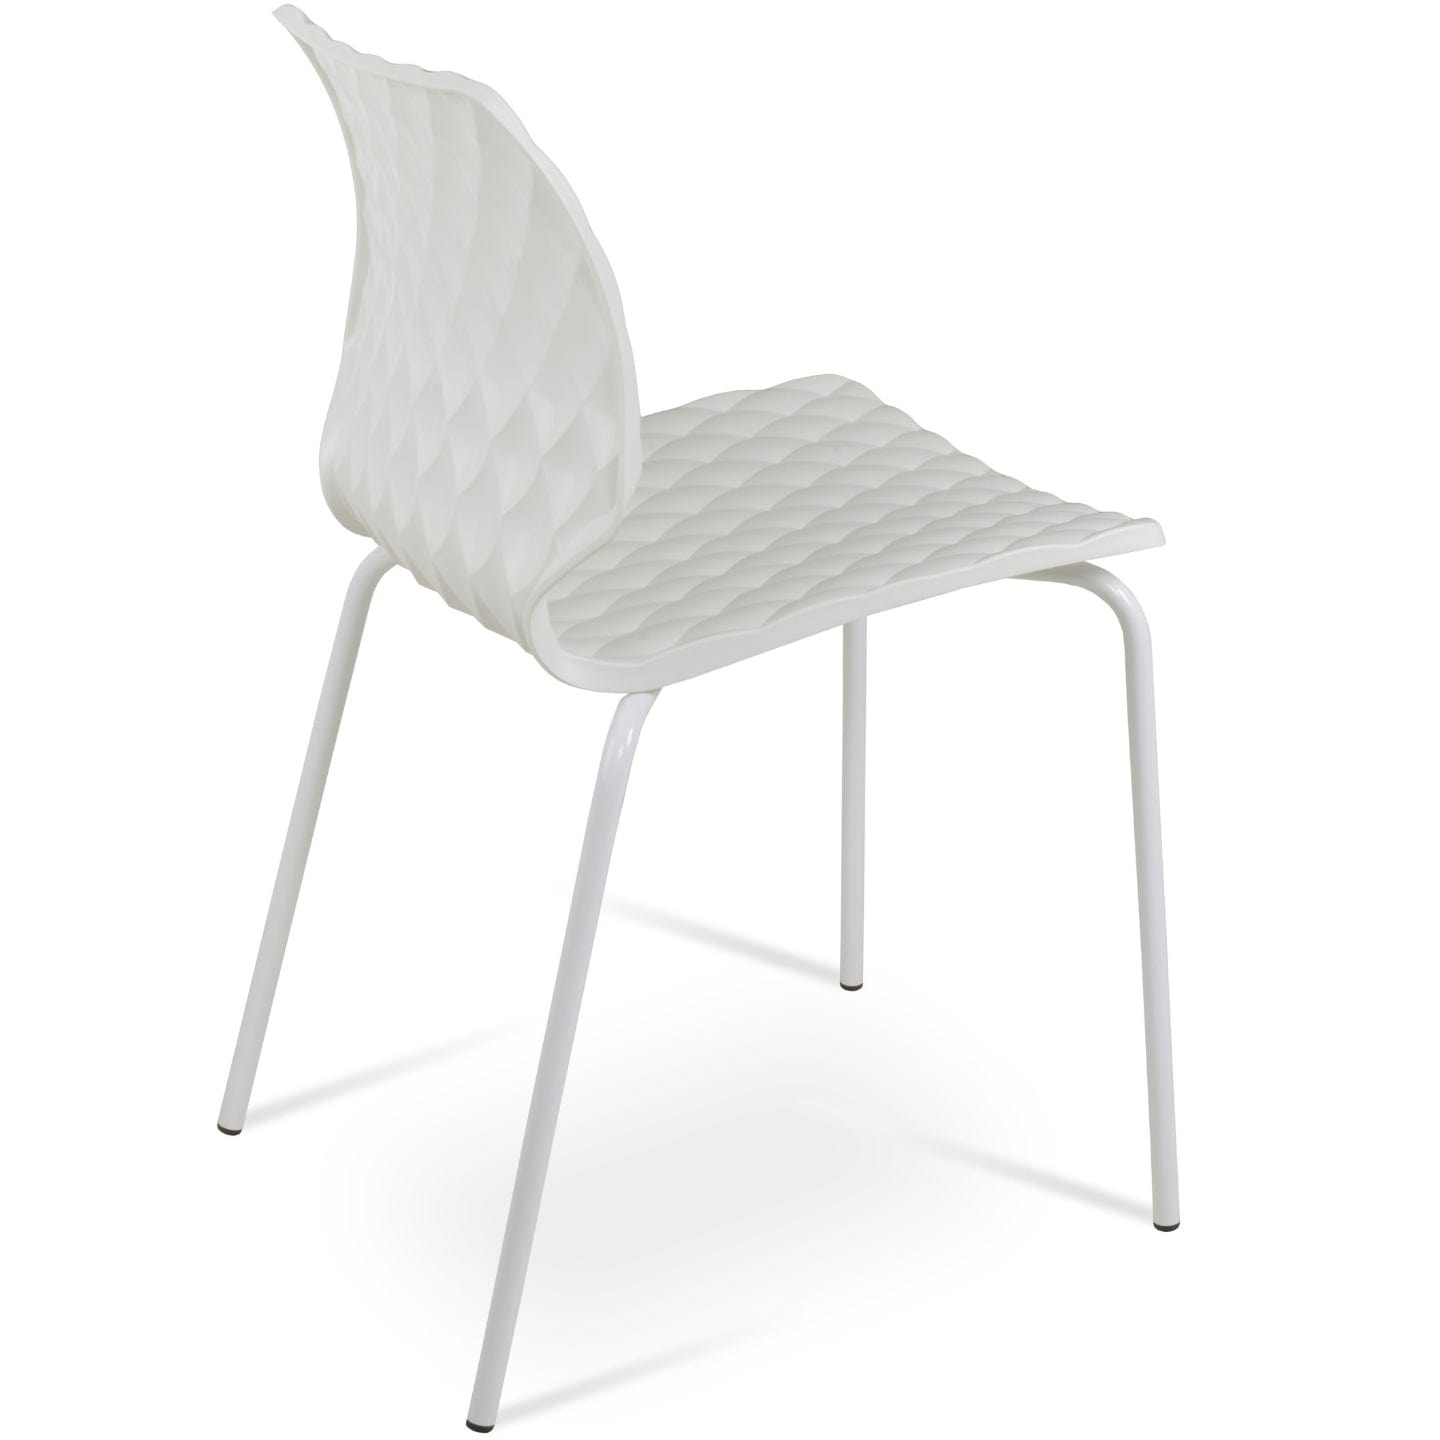 sohoConcept Outdoor Chairs Uni 550 Outdoor Dining Chair | Metal Base | Plastic Seat | Stackable Patio Chair in White